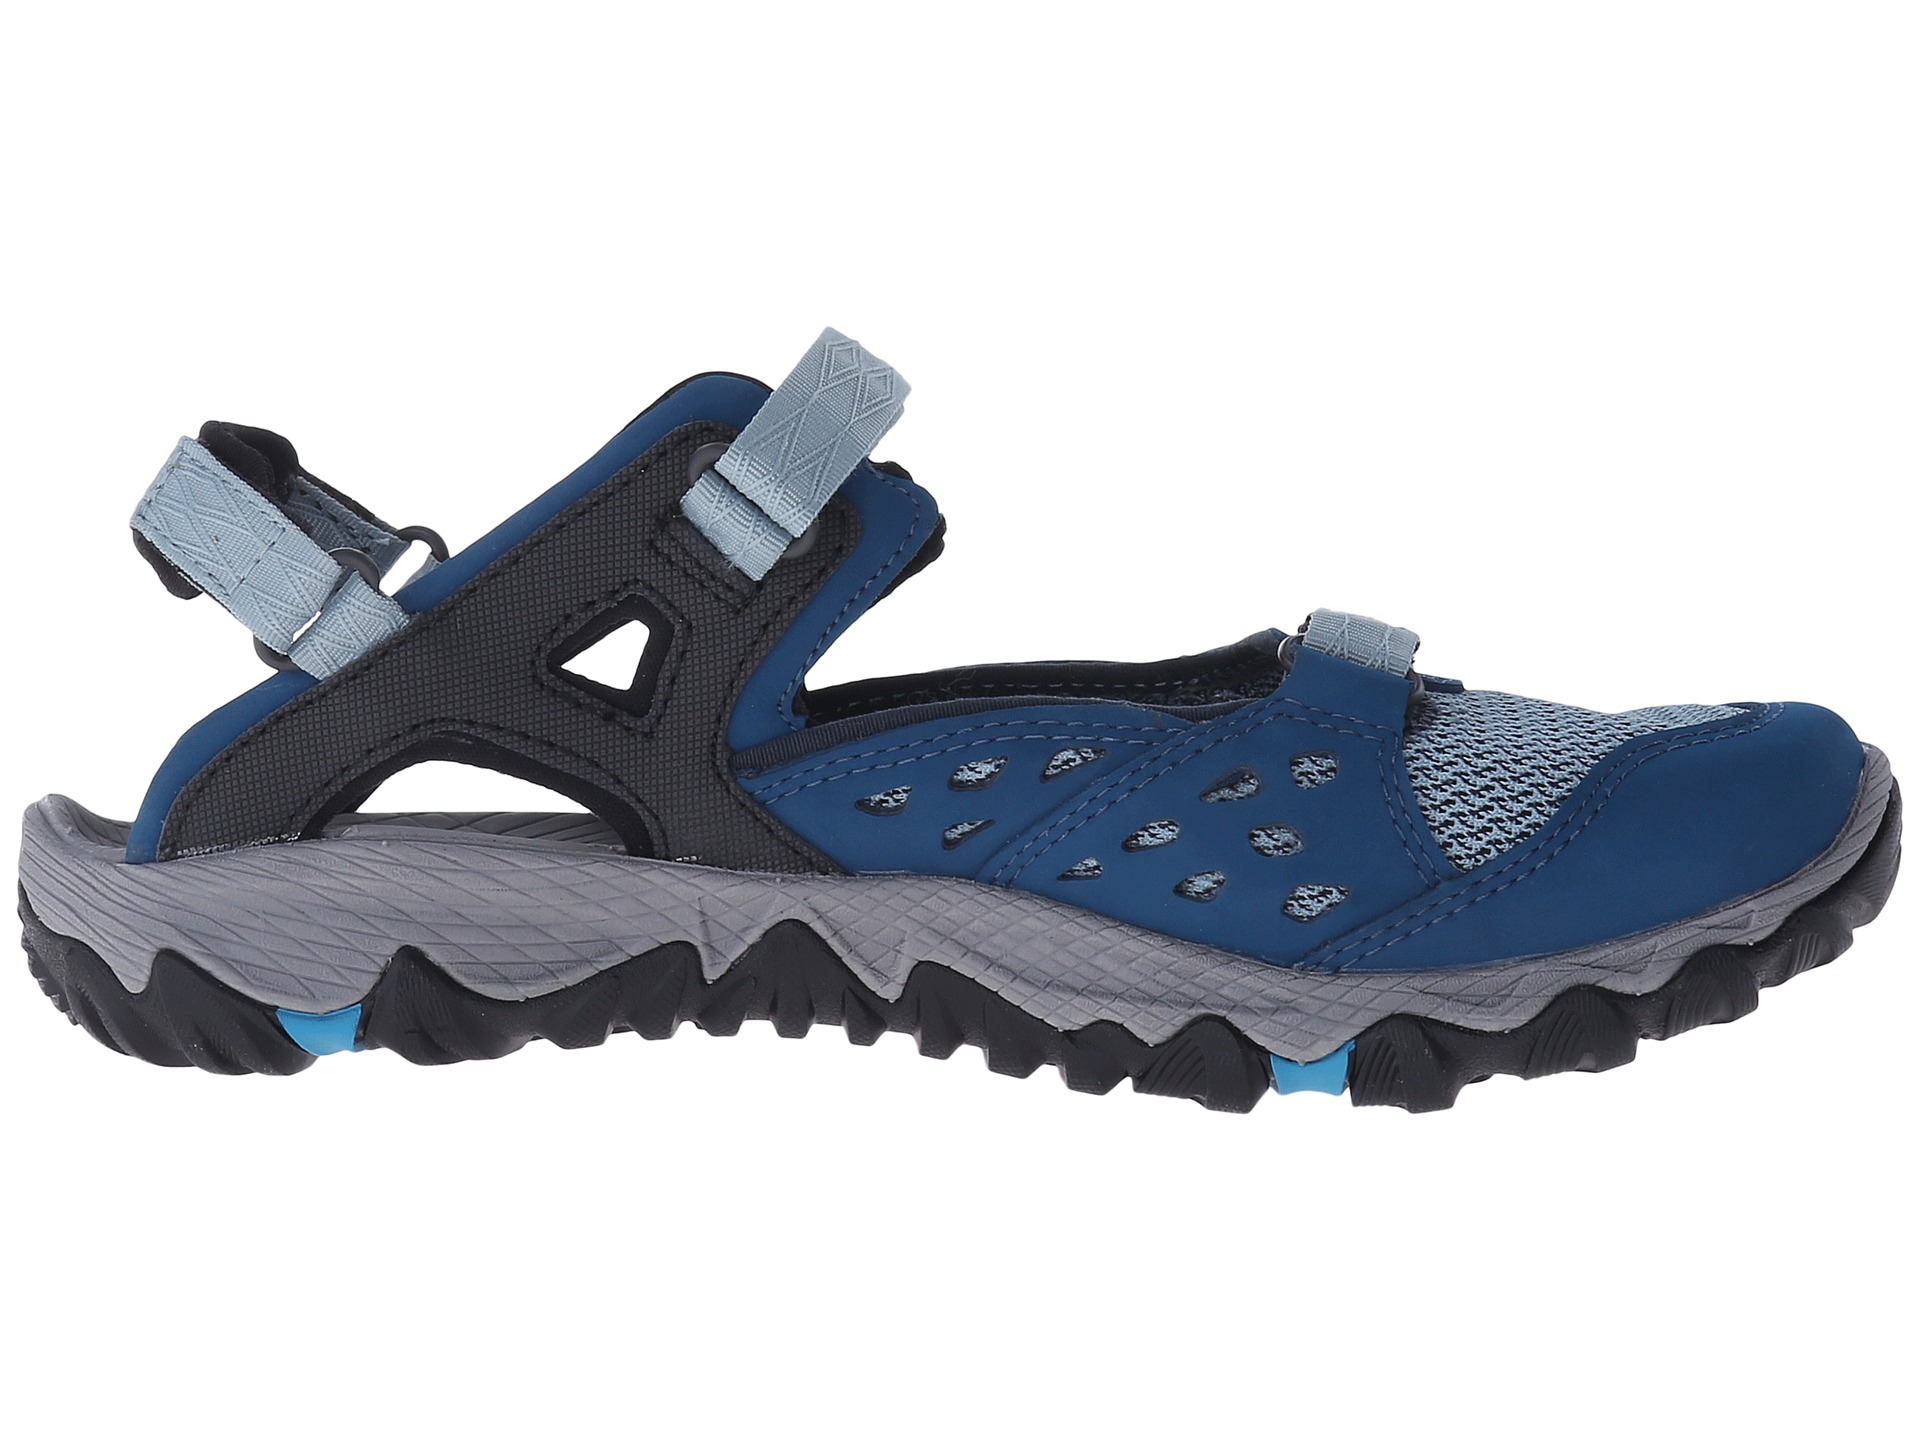 Merrell All Out Blaze Sieve MJ Blue - Zappos.com Free Shipping BOTH Ways